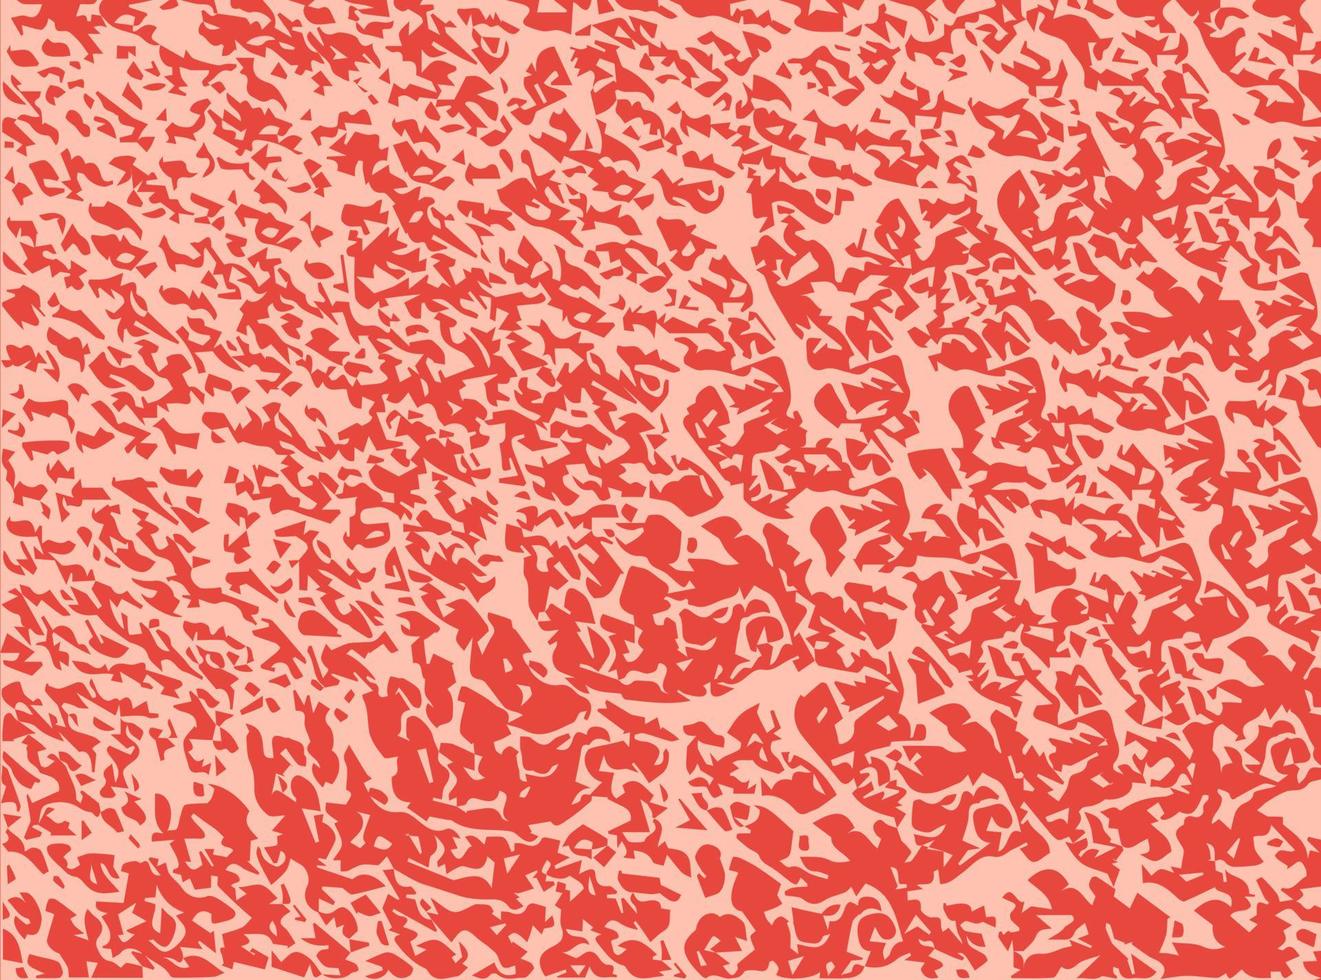 Meat marbled background. vector